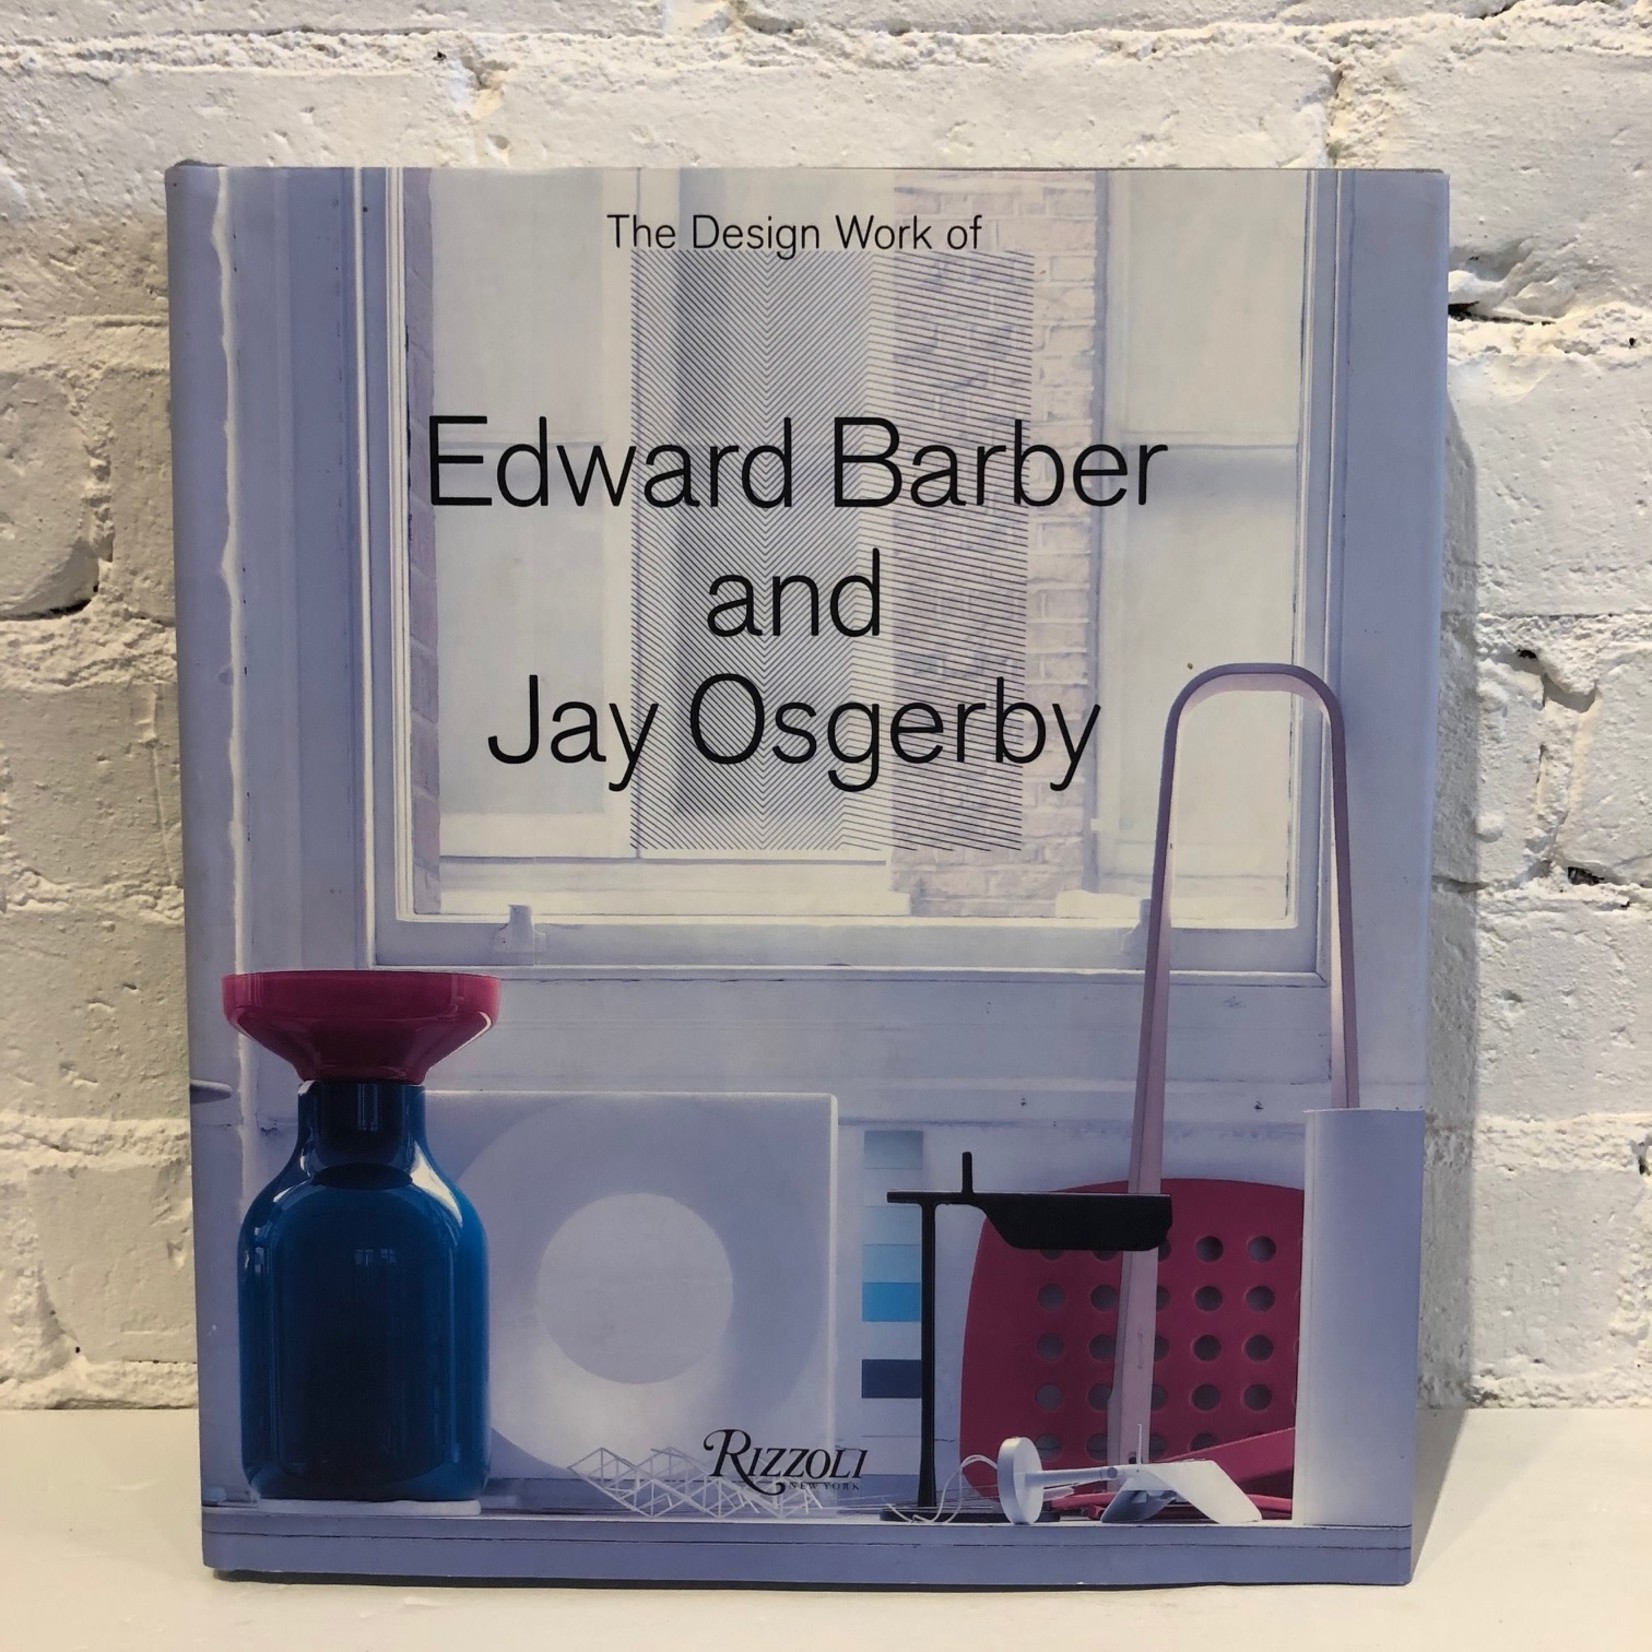 A brief introduction to designers Barber & Osgerby